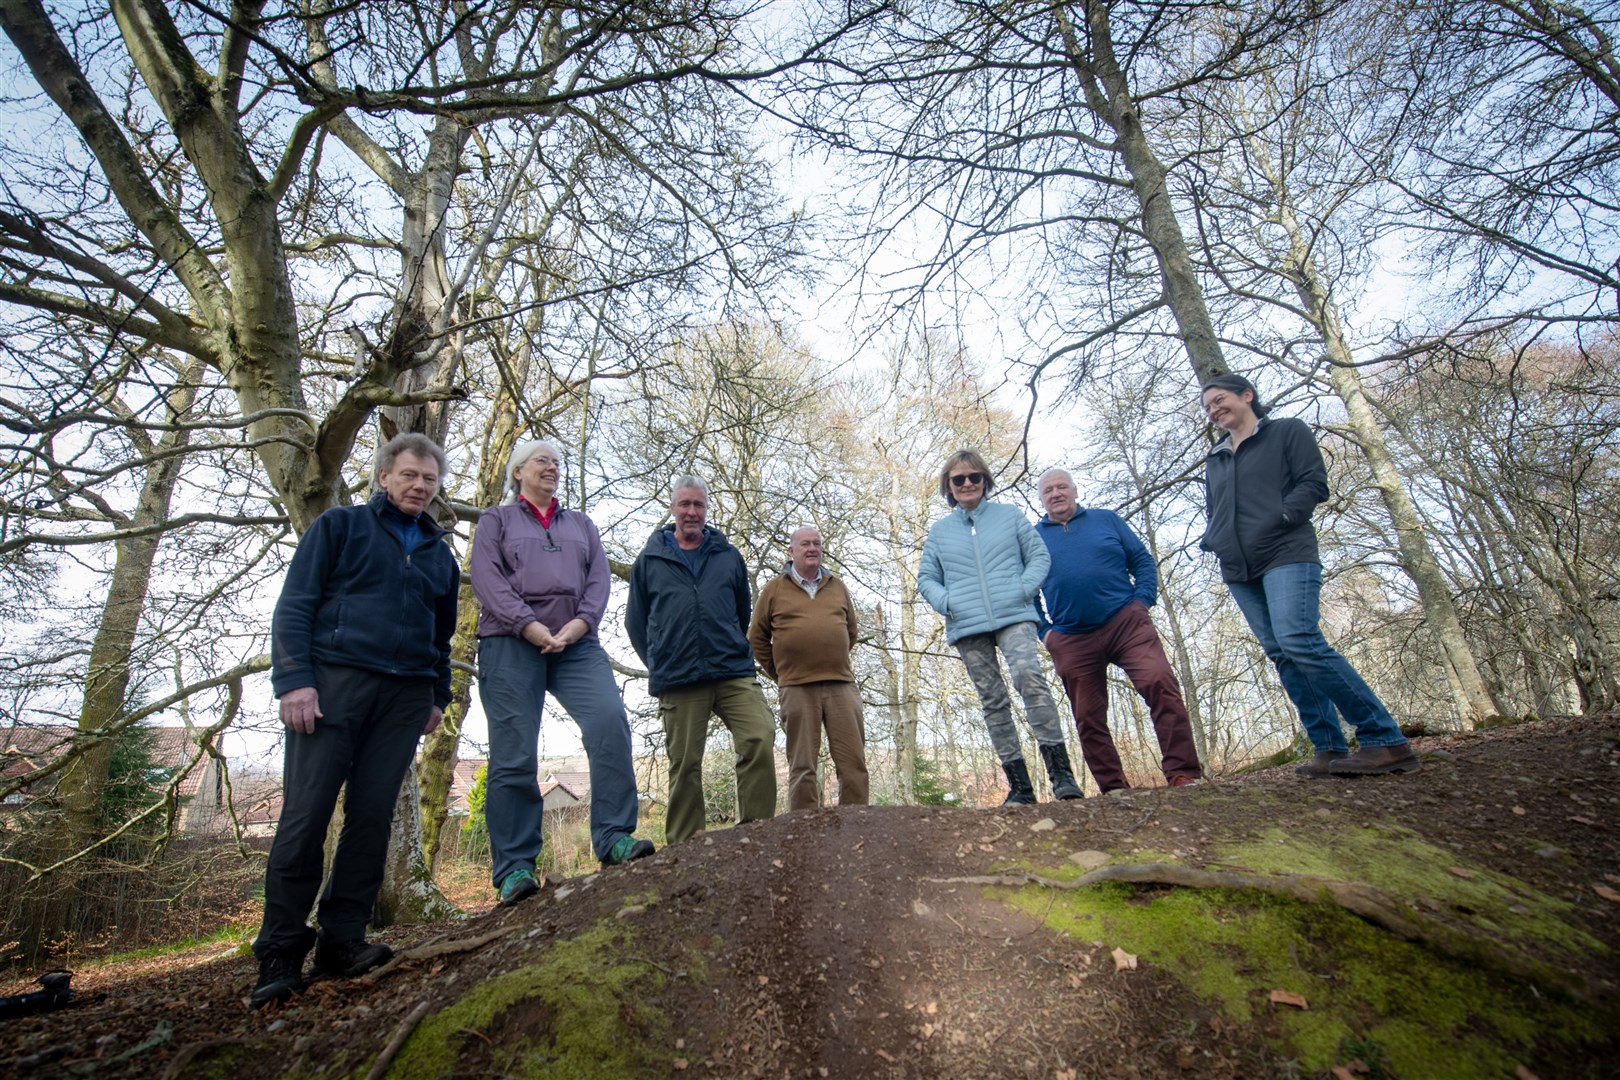 Maryburgh Community Woodland Group is now seeking local feedback. Ian Fraser (from left), Siobhan Fraser, John Mackay, Ewan McHardy, Angela Mackay, Donald Stuart and Megan Parker, chairperson. Picture: Callum Mackay.